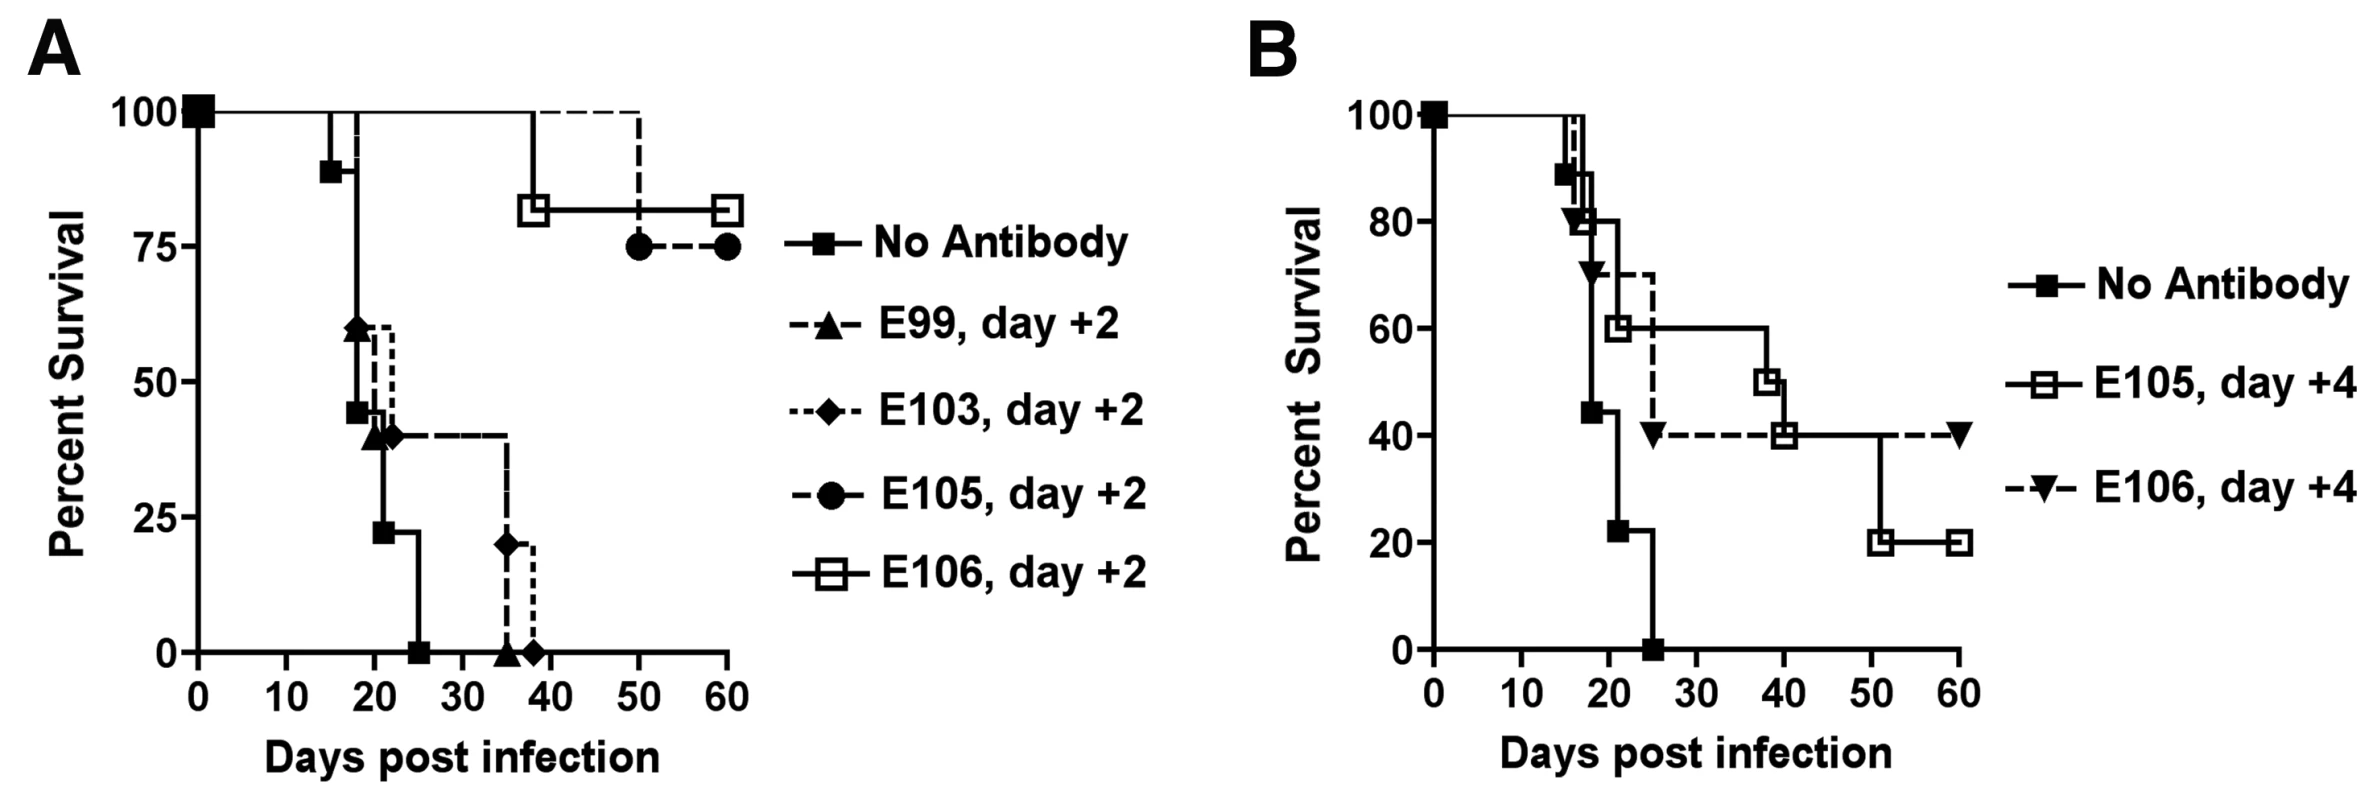 Therapeutic efficacy of strongly neutralizing antibodies in mice after DENV-1 infection.